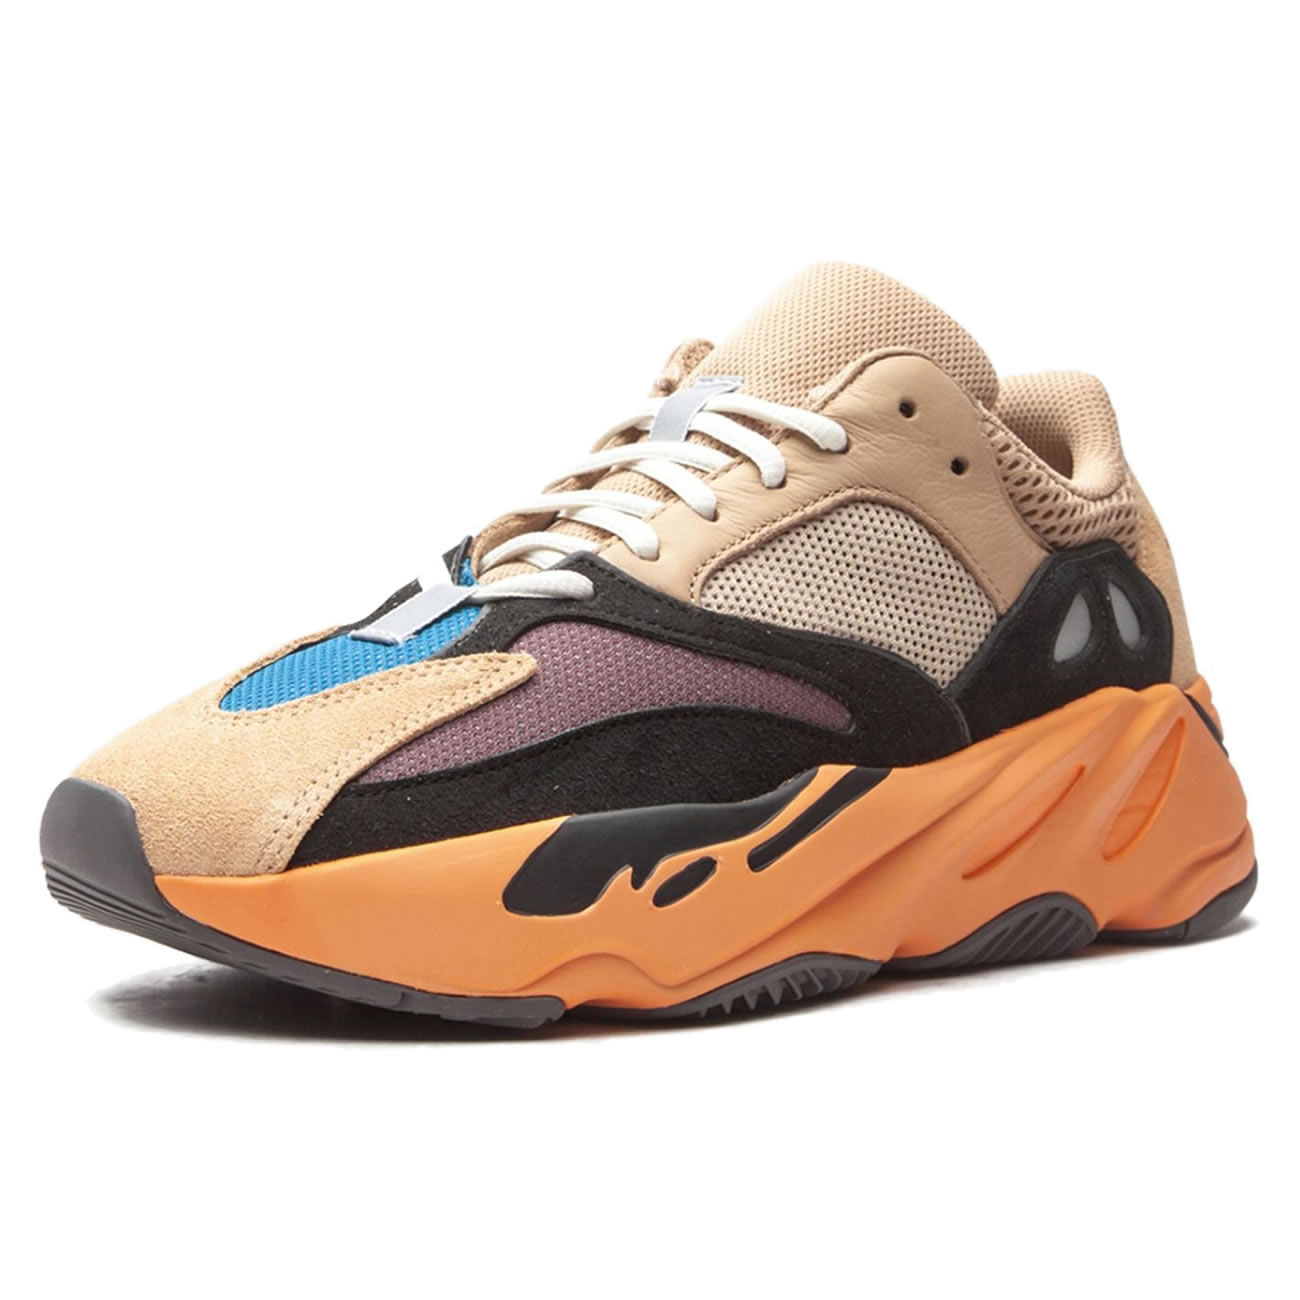 adidas Yeezy Boost 700 "Enflame Amber" GW0297